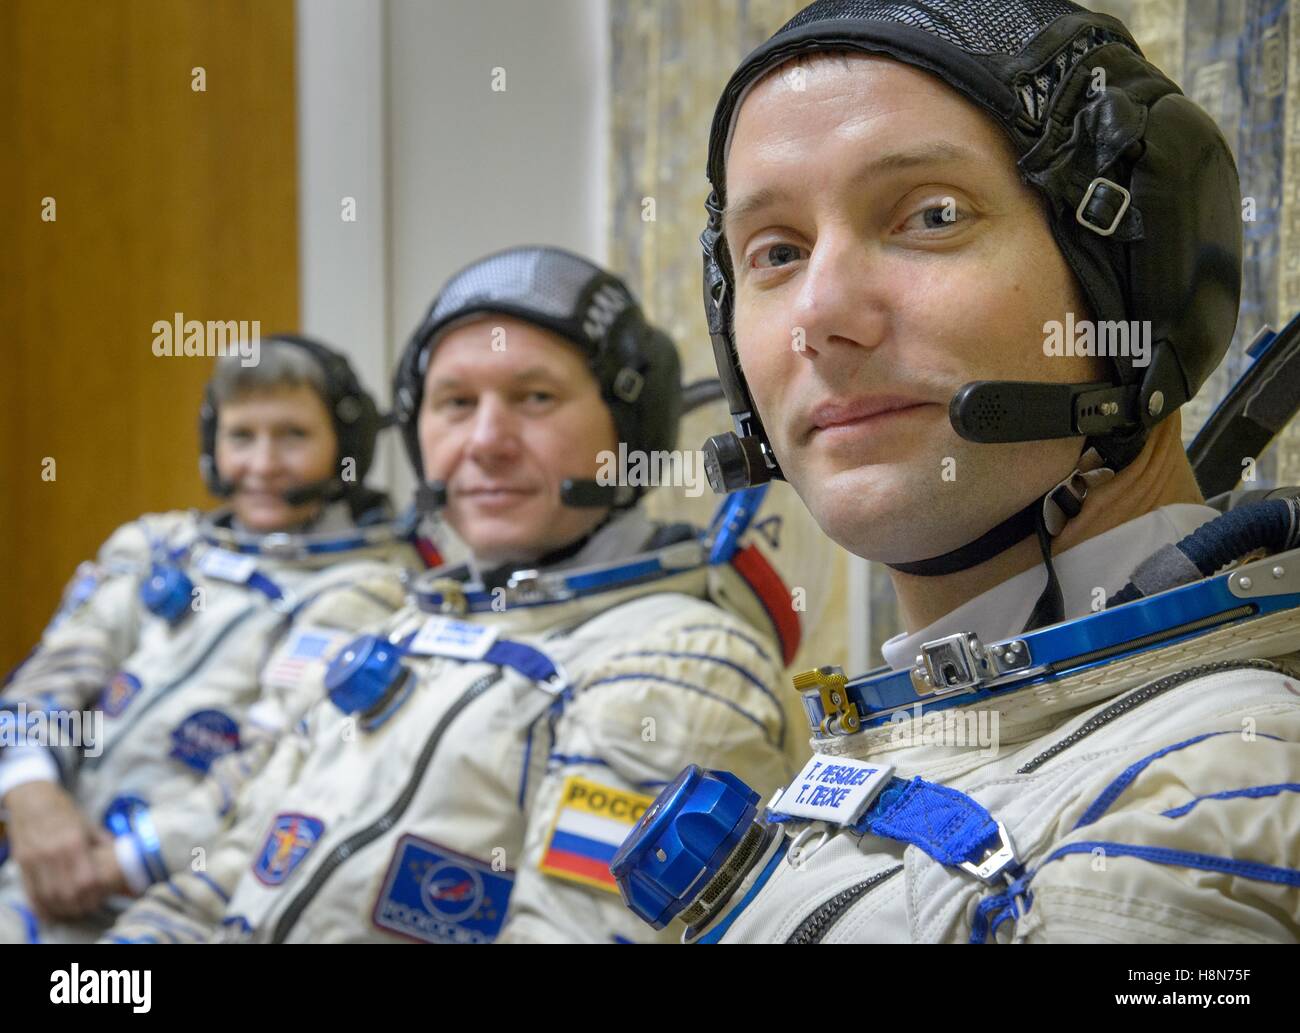 NASA International Space Station Expedition 50 Soyuz MS-03 prime crew astronauts (L-R), American astronaut Peggy Whitson, Russian cosmonaut Oleg Novitskiy of Roscosmos, and Thomas Pesquet of the European Space Agency prepare for their qualification exams October 25, 2016 in Star City, Russia. Stock Photo